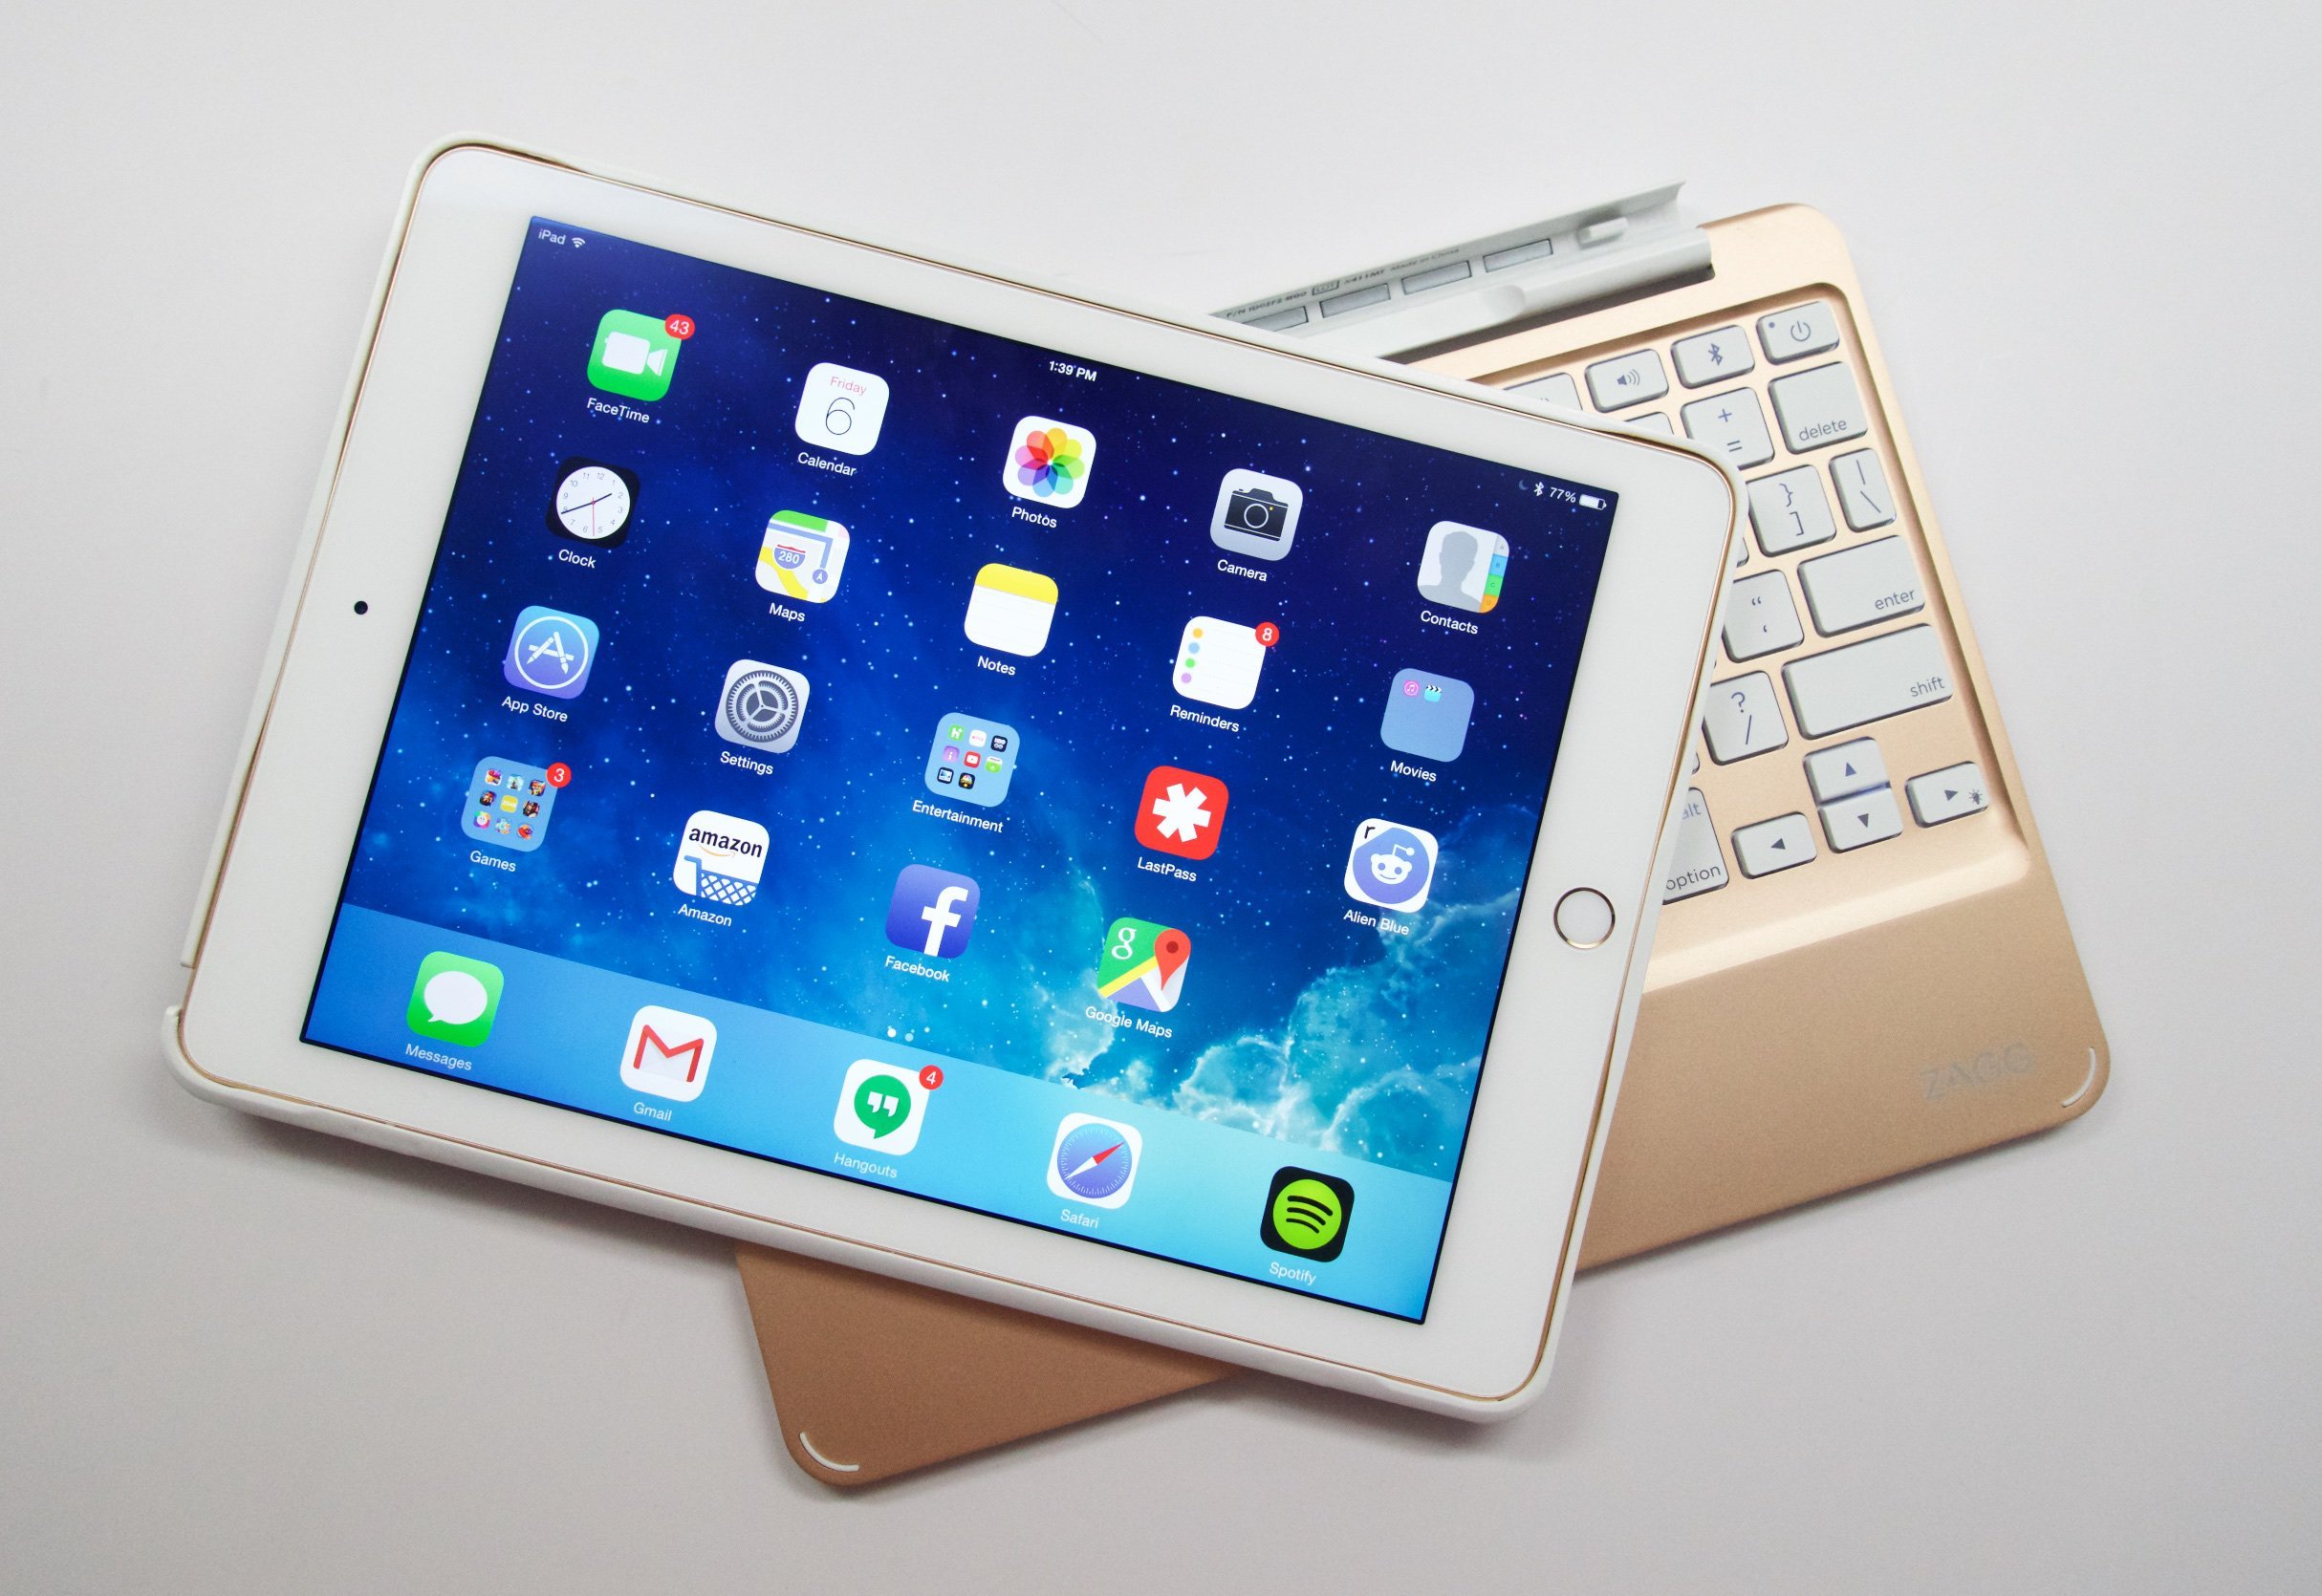 The iPad Air 2 delivers plenty of power for games, productivity and entertainment.